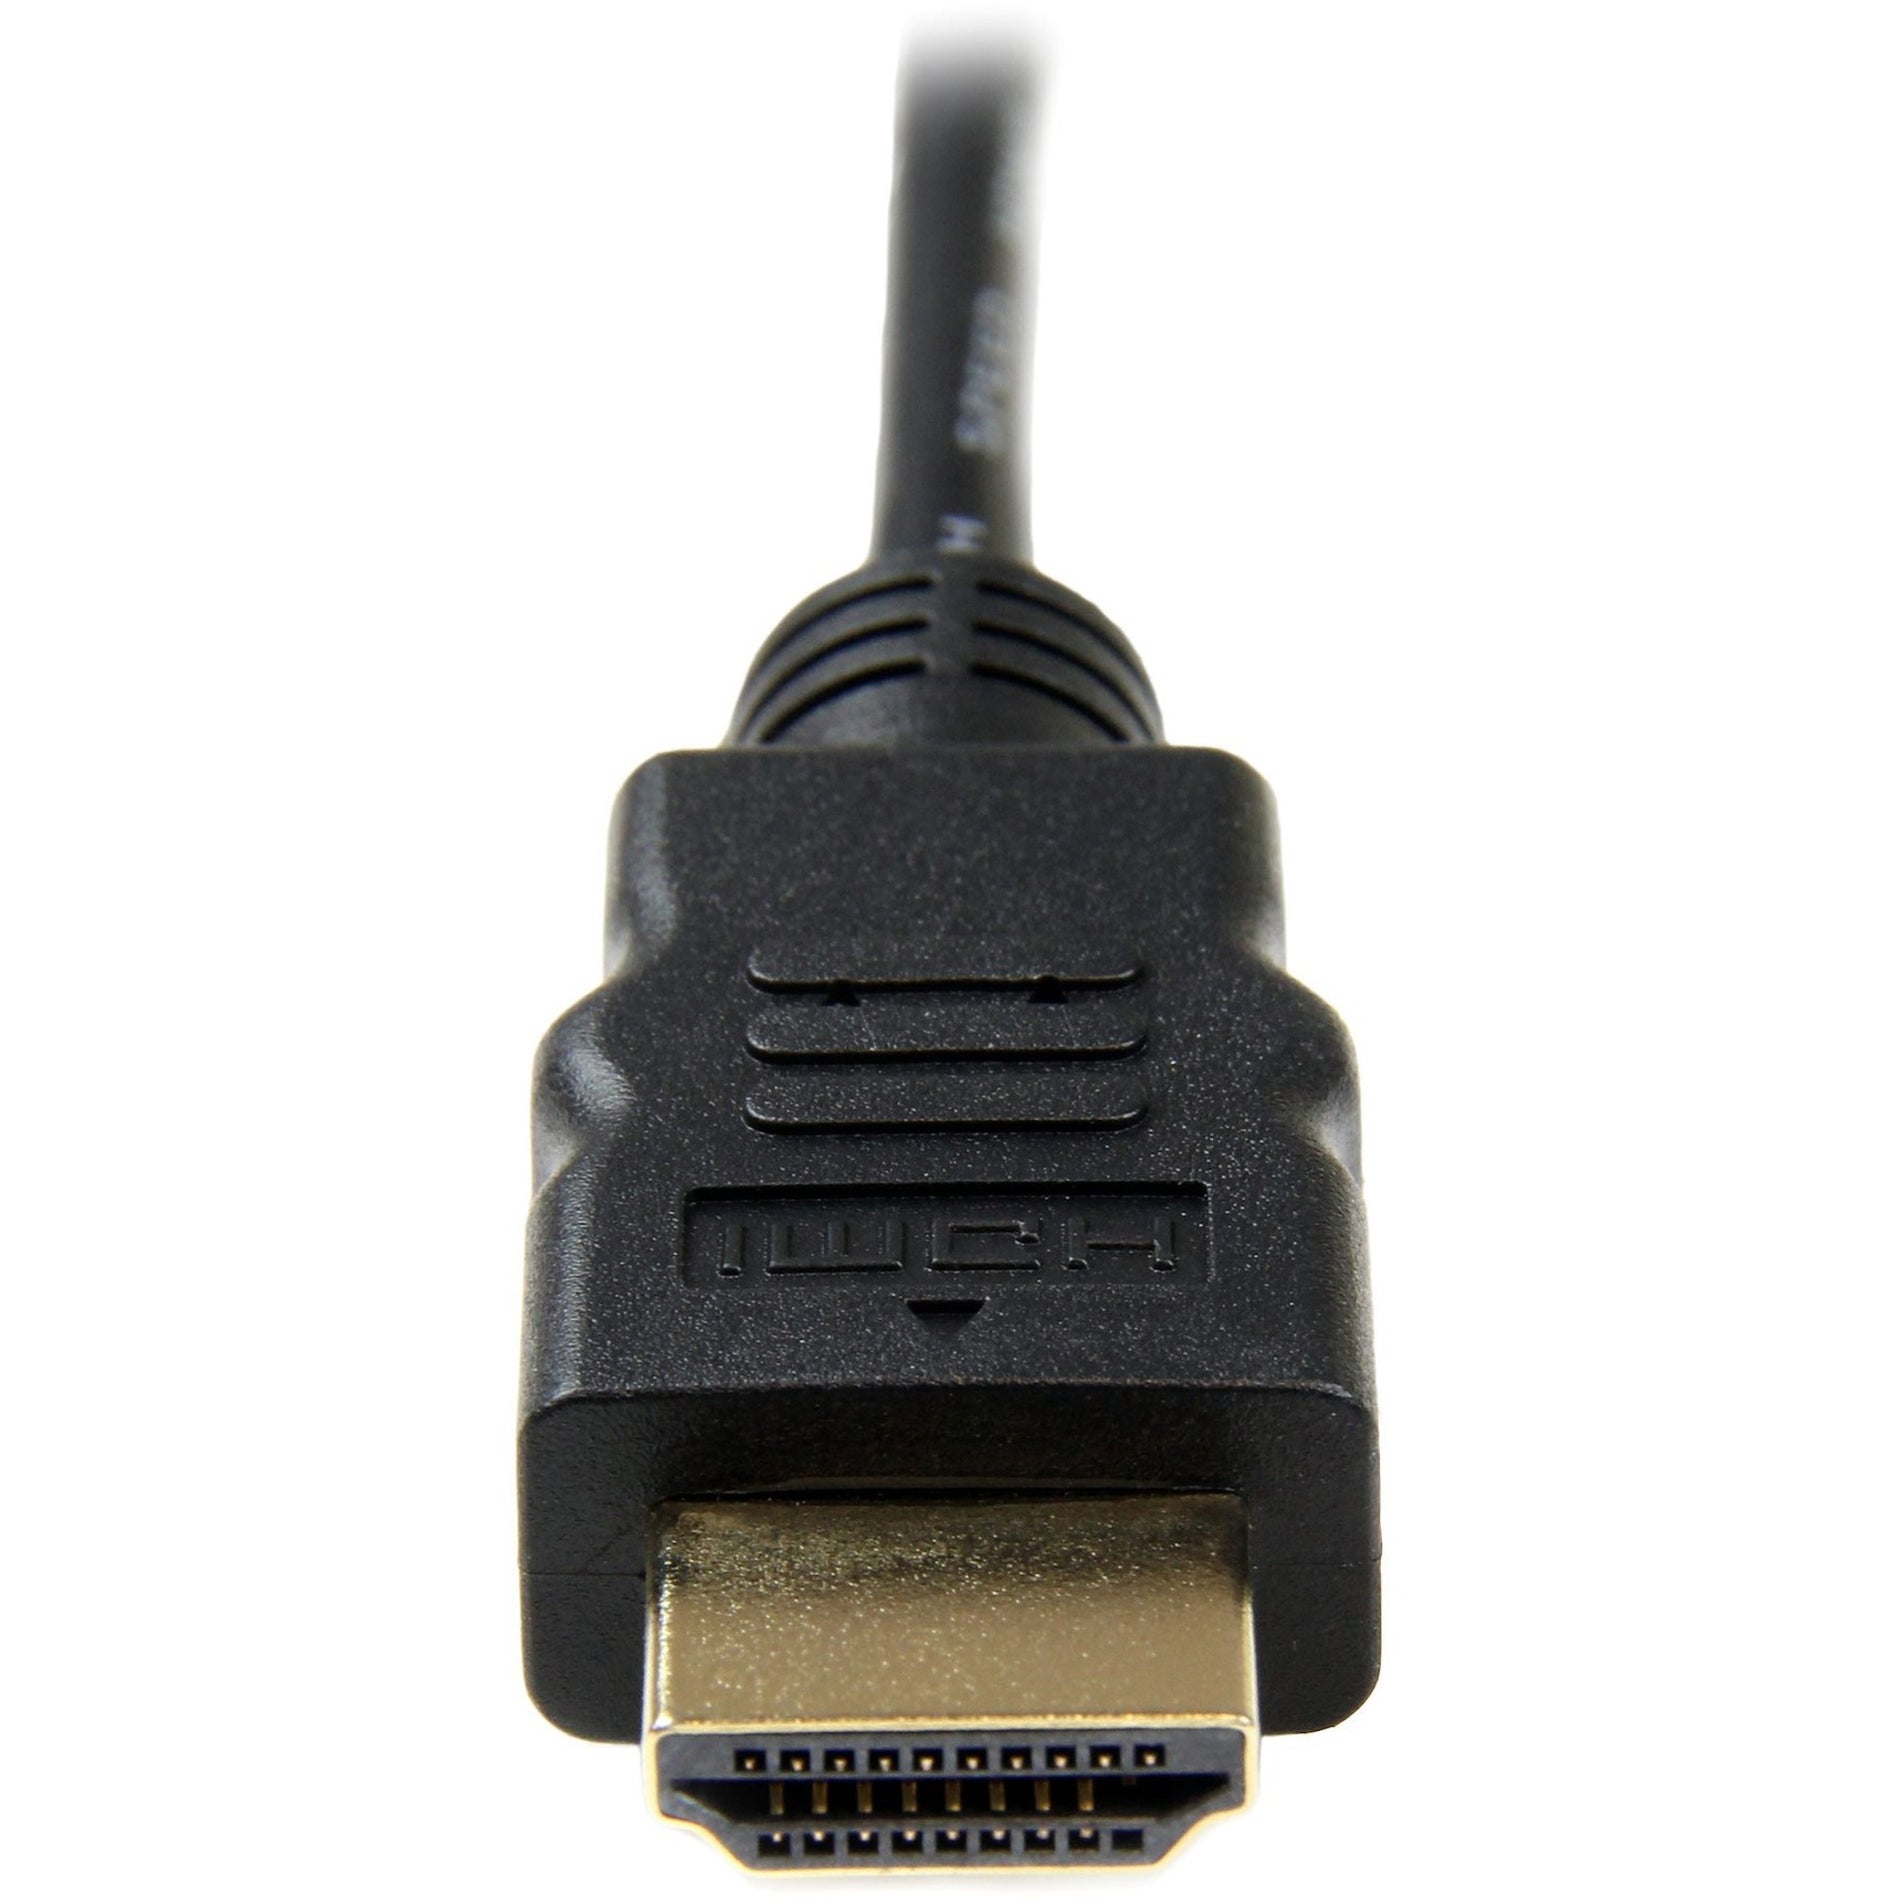 High Speed HDMI Cable with Ethernet - HDMI to HDMI Micro - 9.84 ft (HDADMM3M)